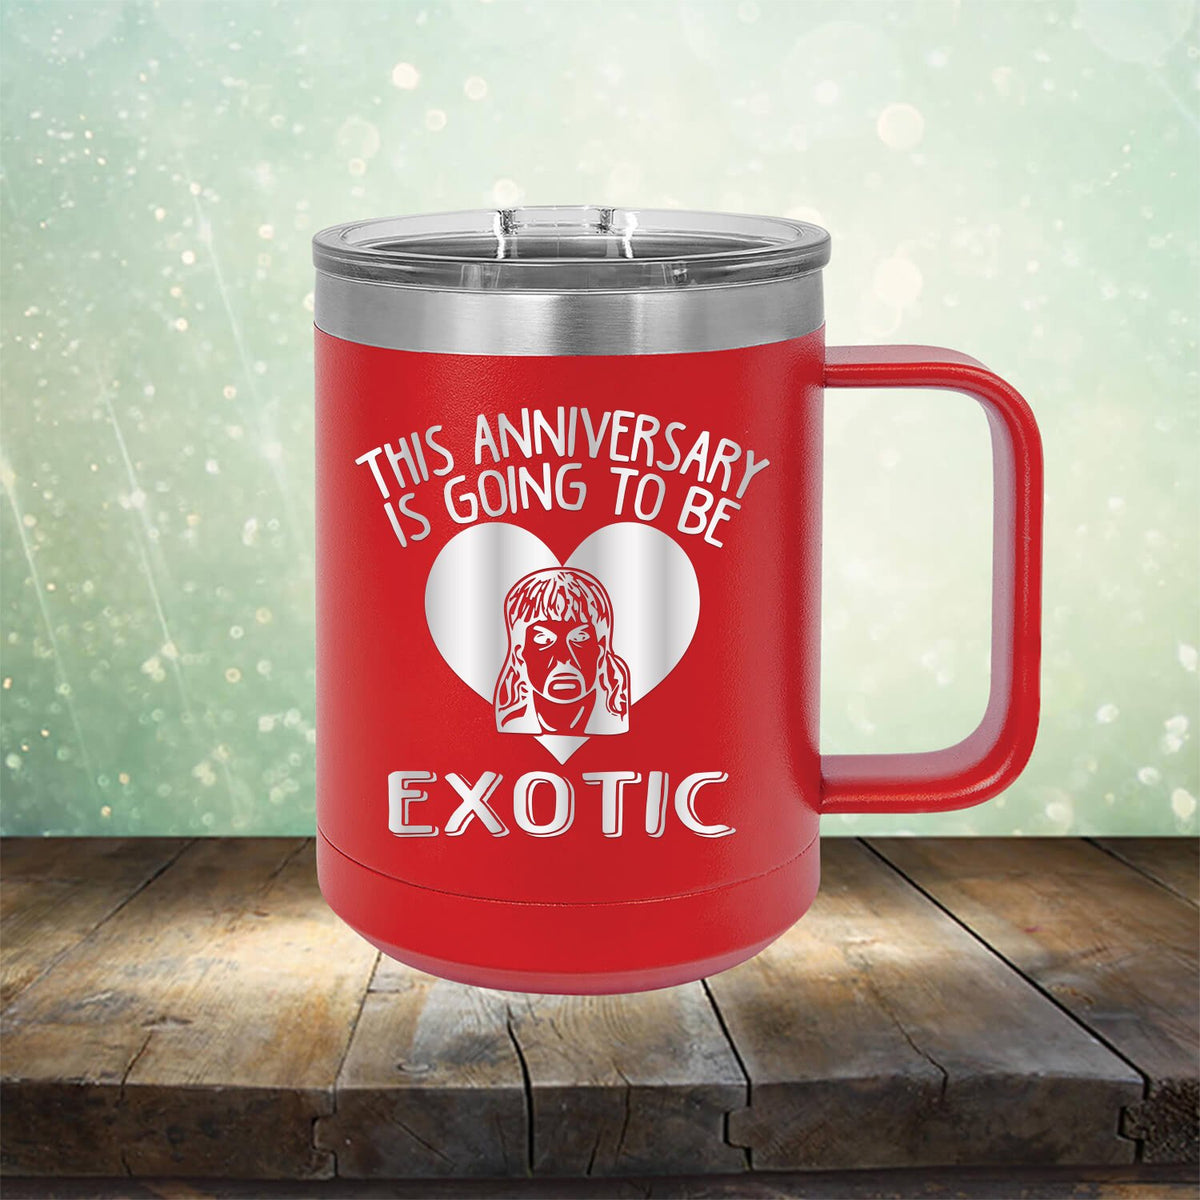 This Anniversary is Going To Be Exotic